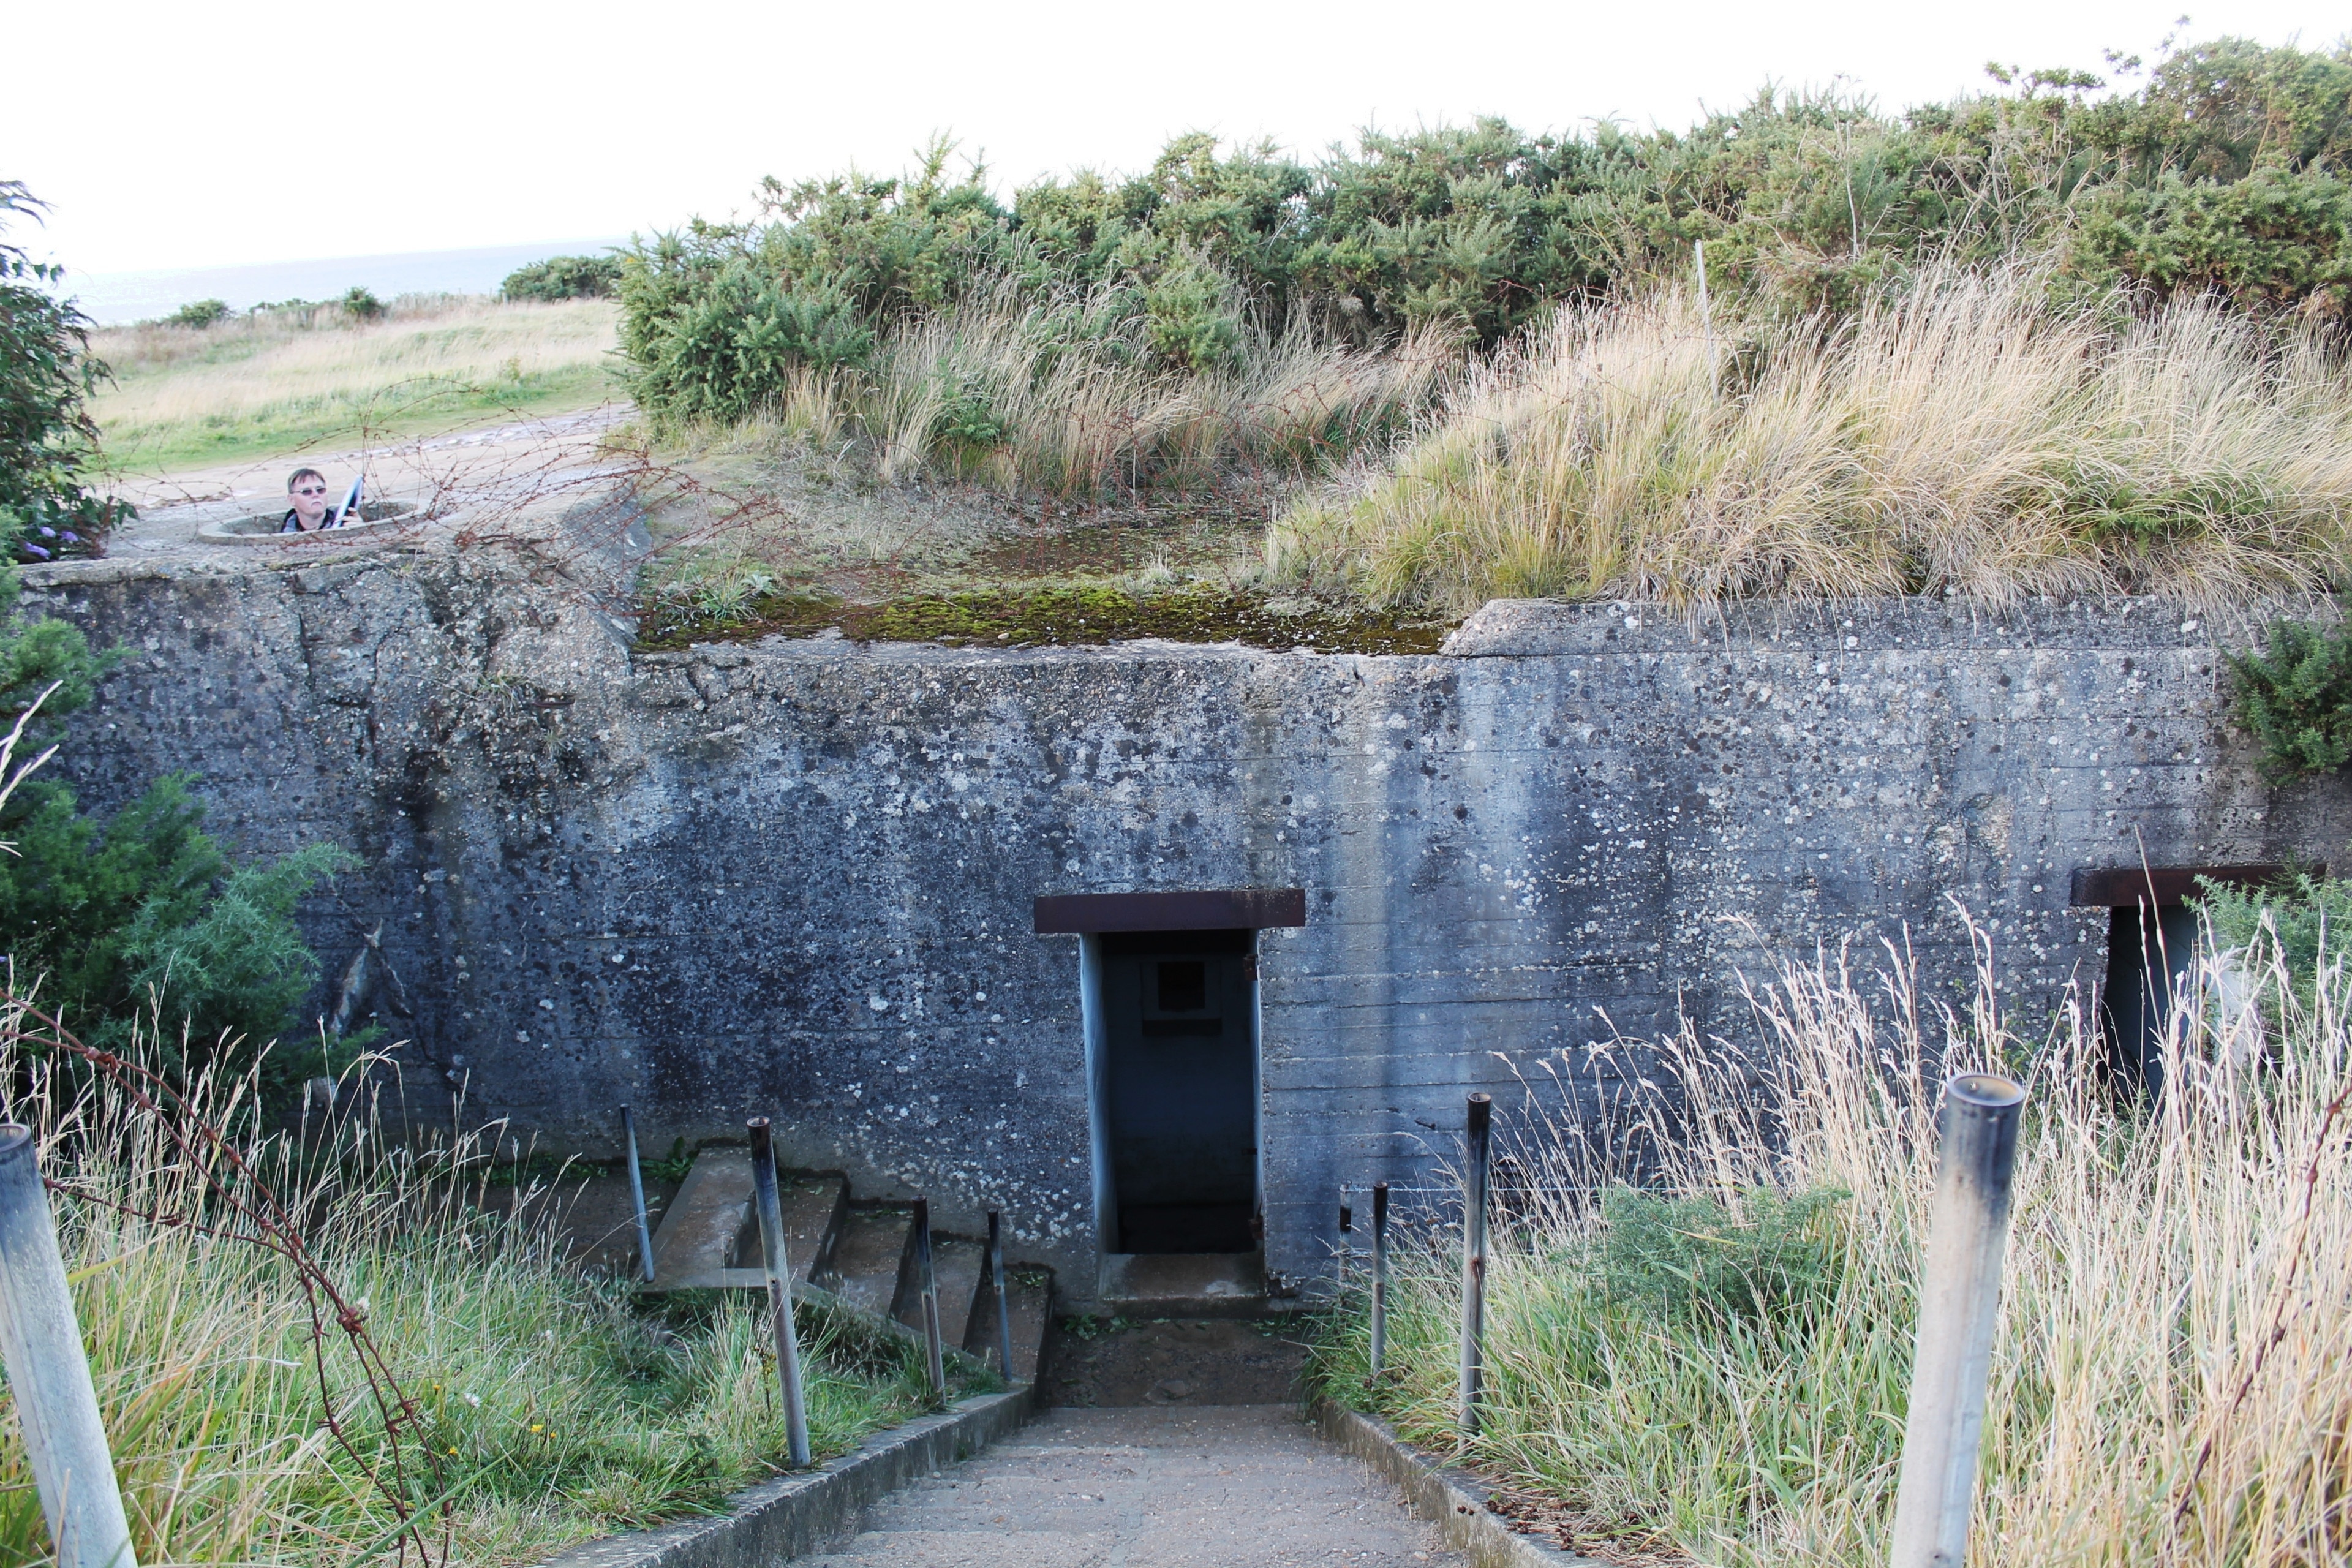 The old World War 2 German bunkers. A very interesting site 